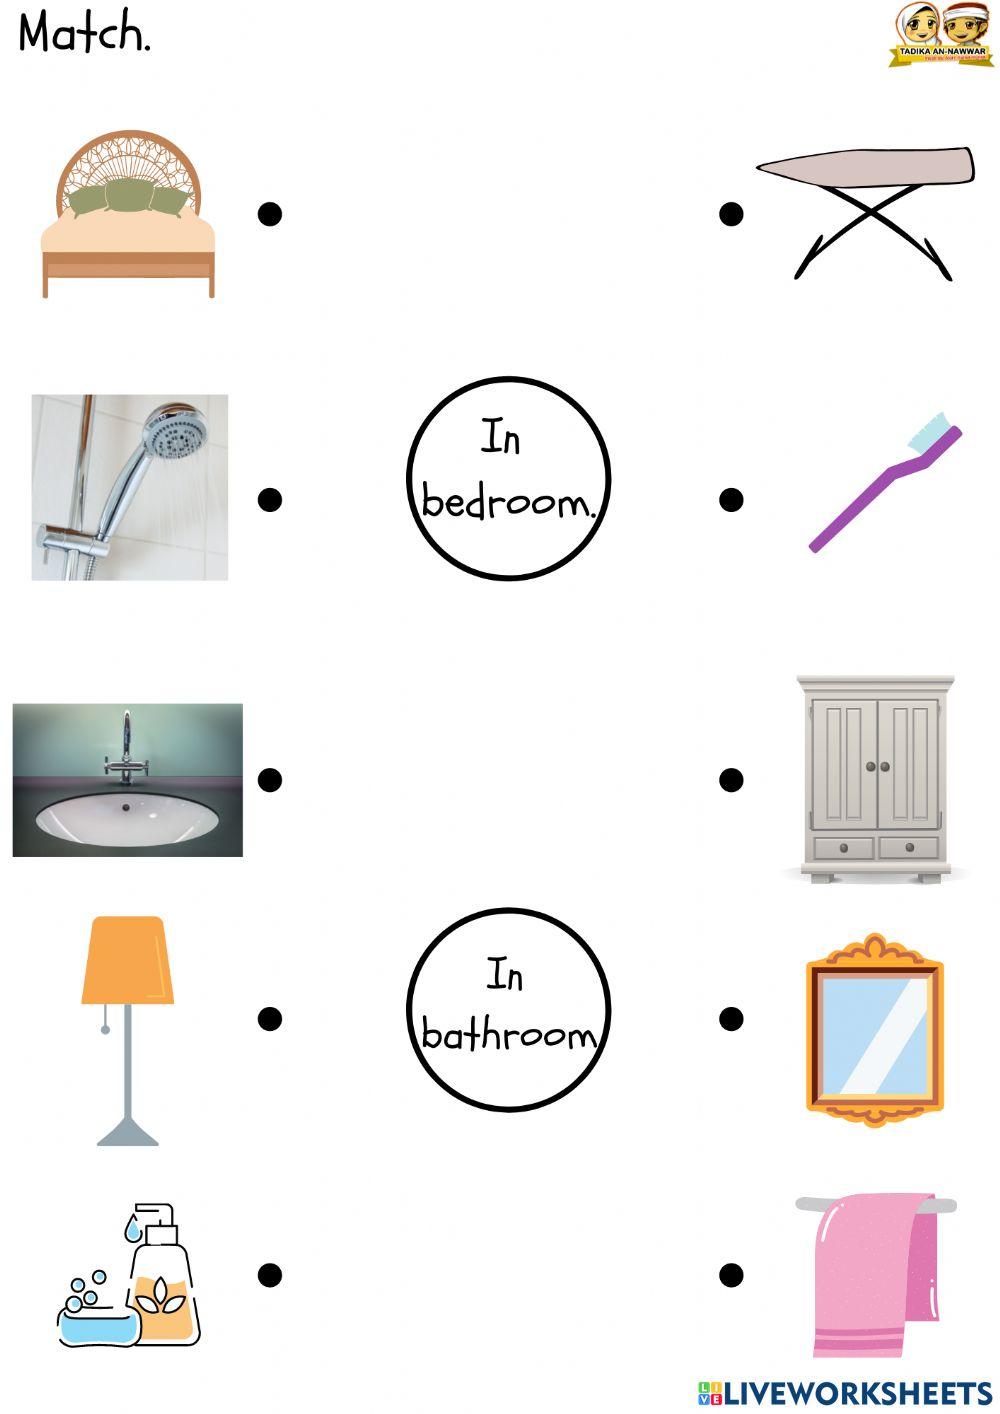 Eng : things in the bathroom and bedroom